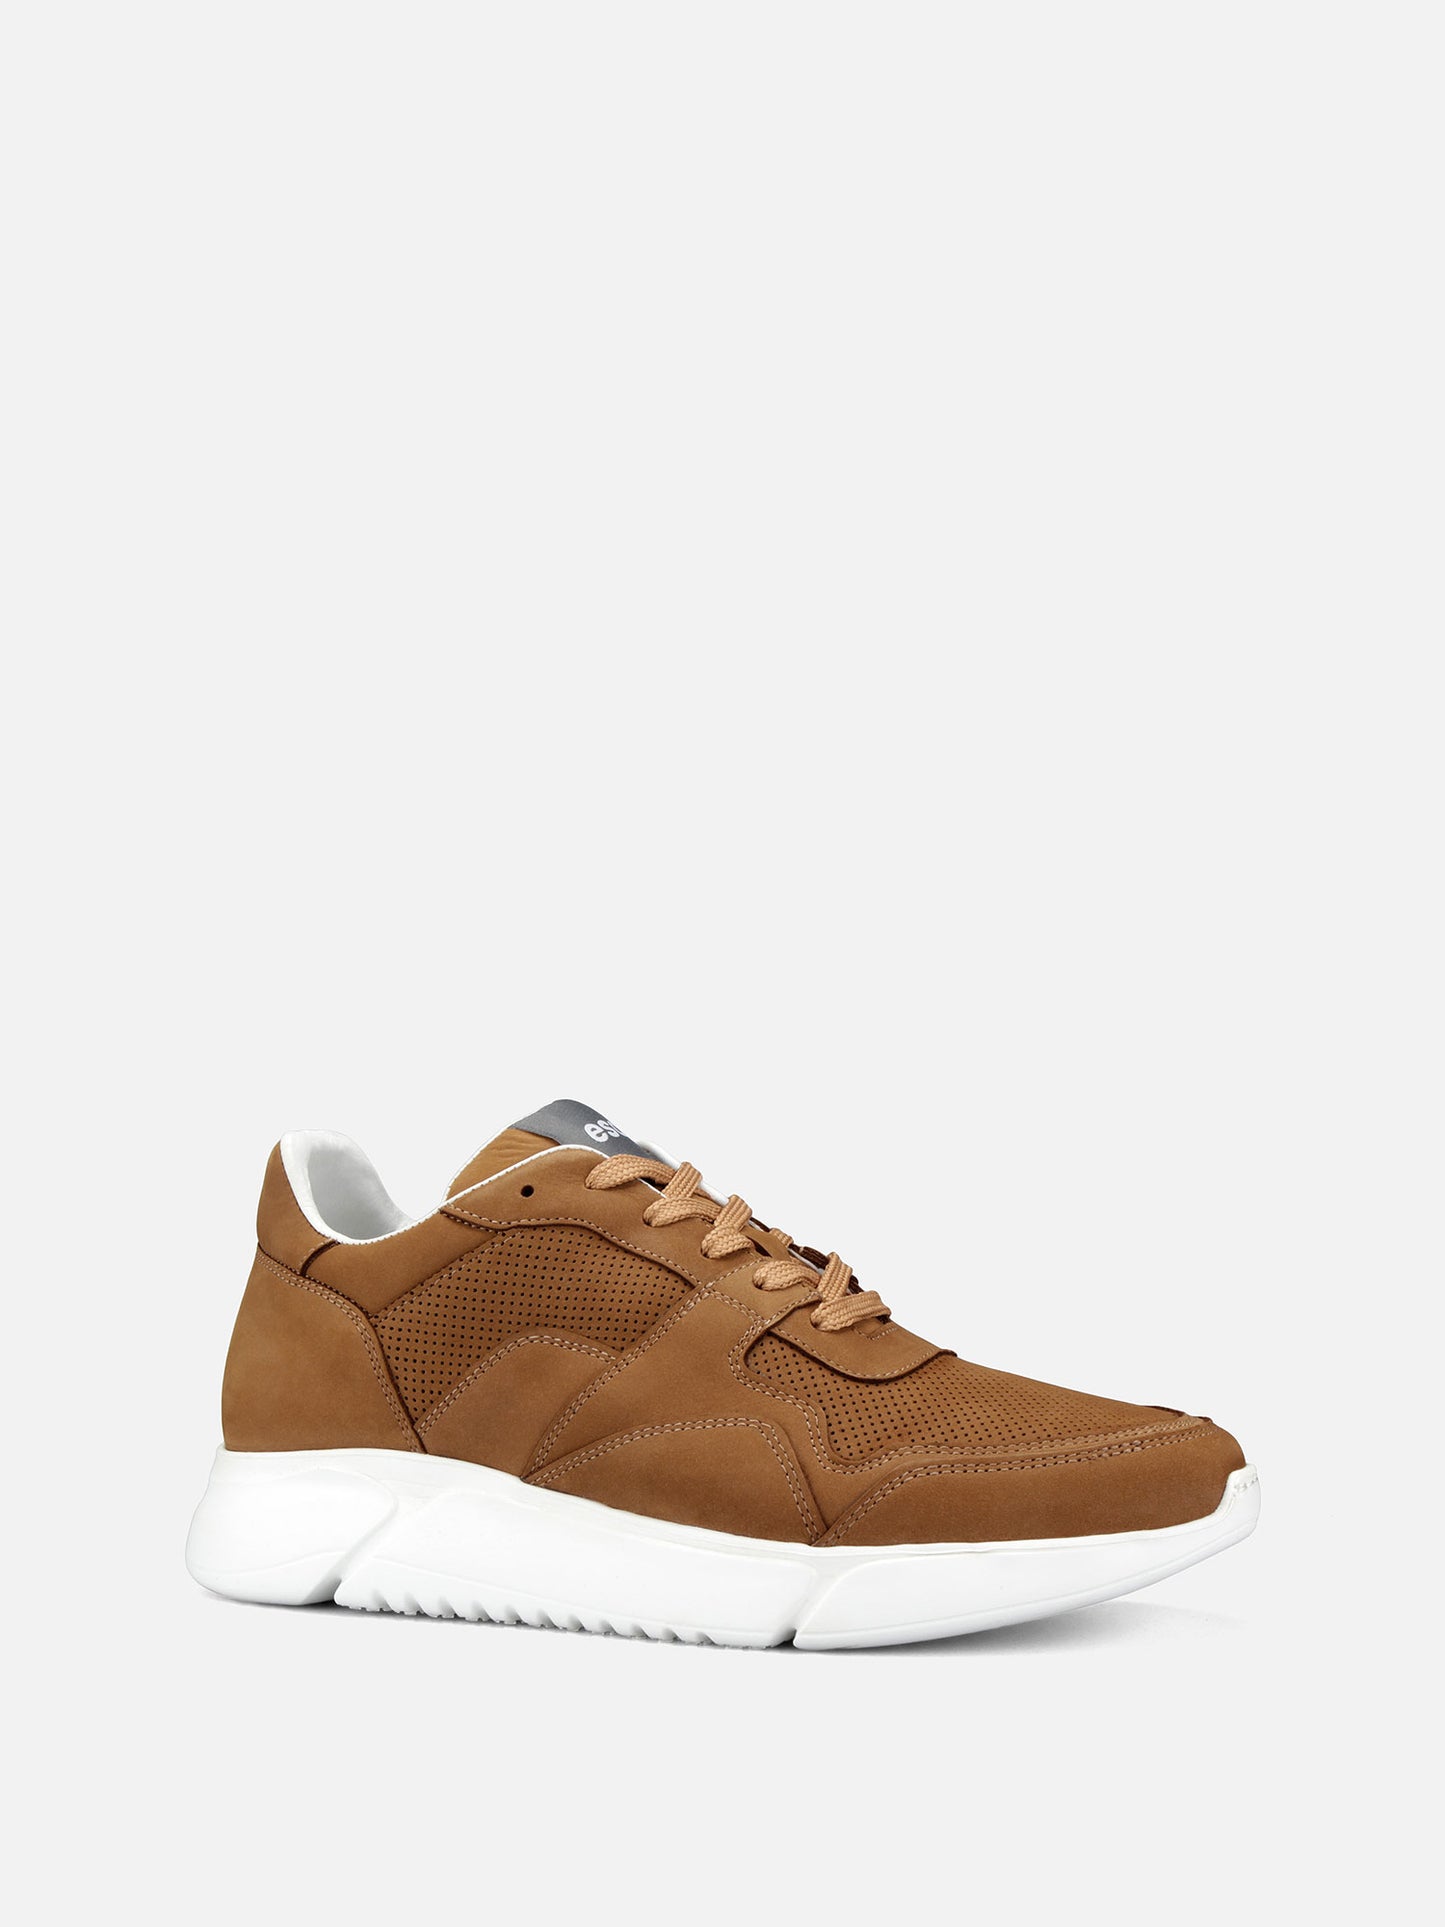 DRAG Trainer Leather Sneakers - Cognac